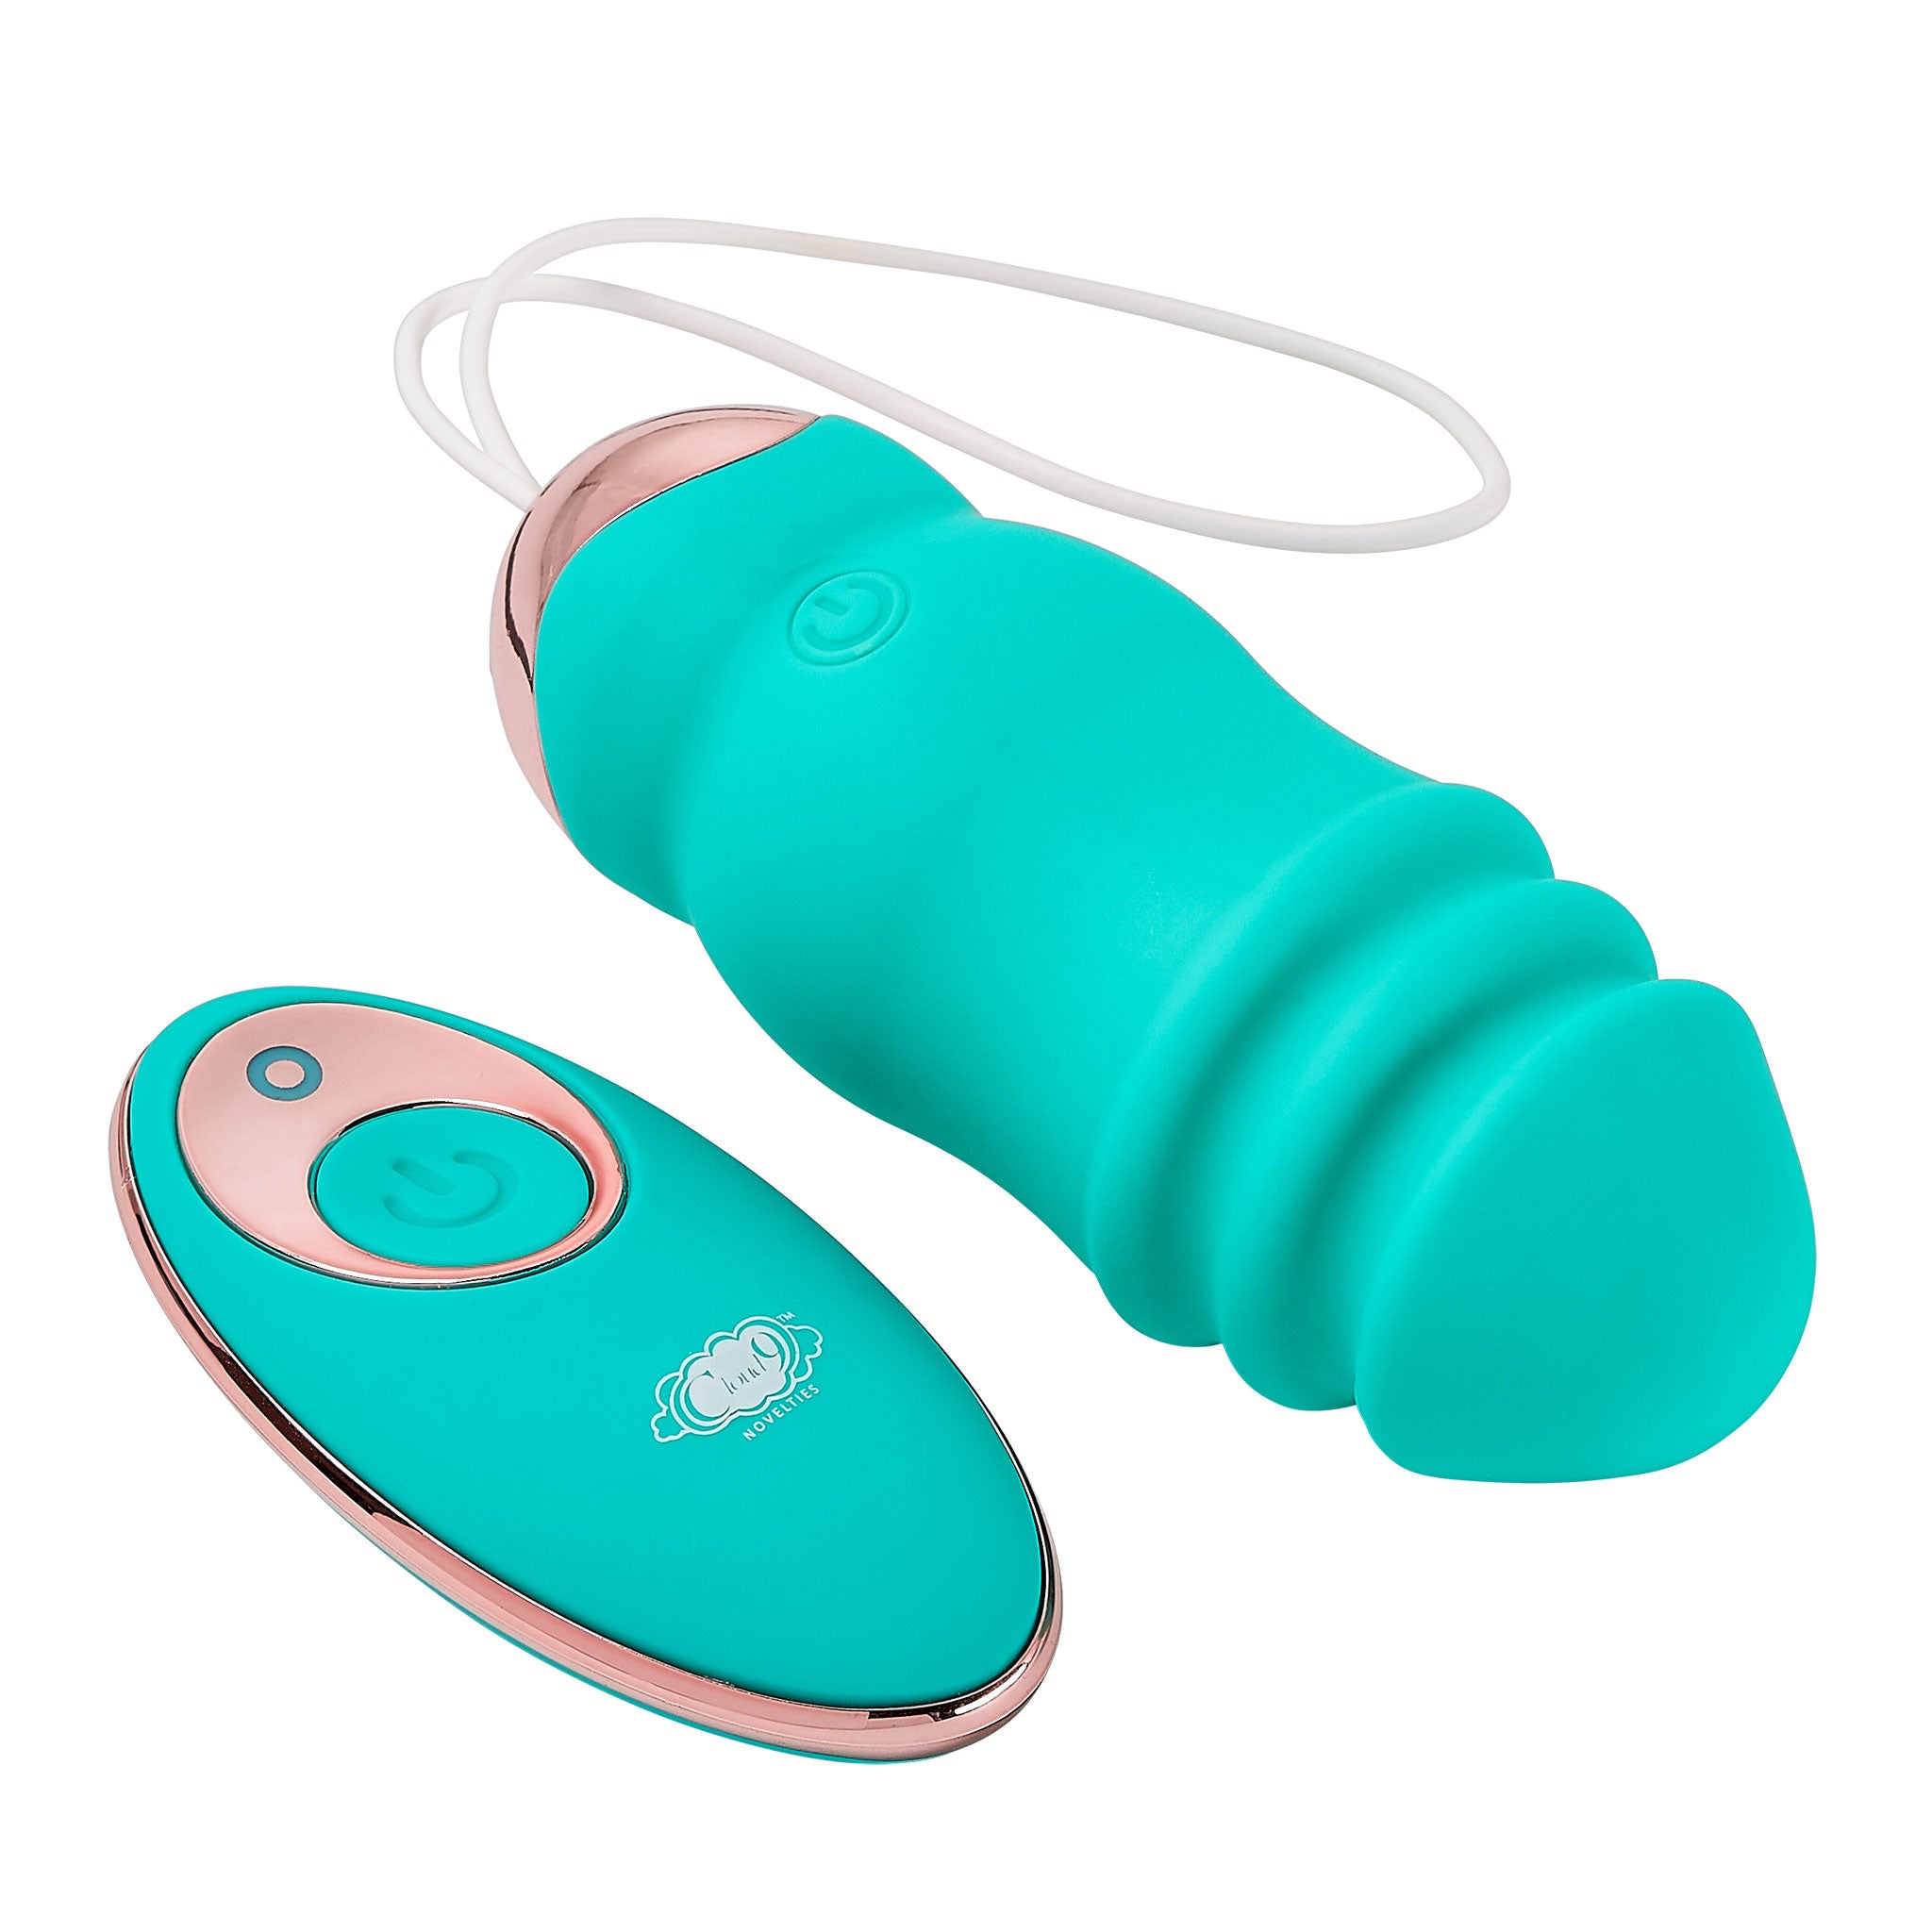 Cloud 9 Health & Wellness Wireless Remote Control Egg W/ Stroking Motion Teal Stroking Motion